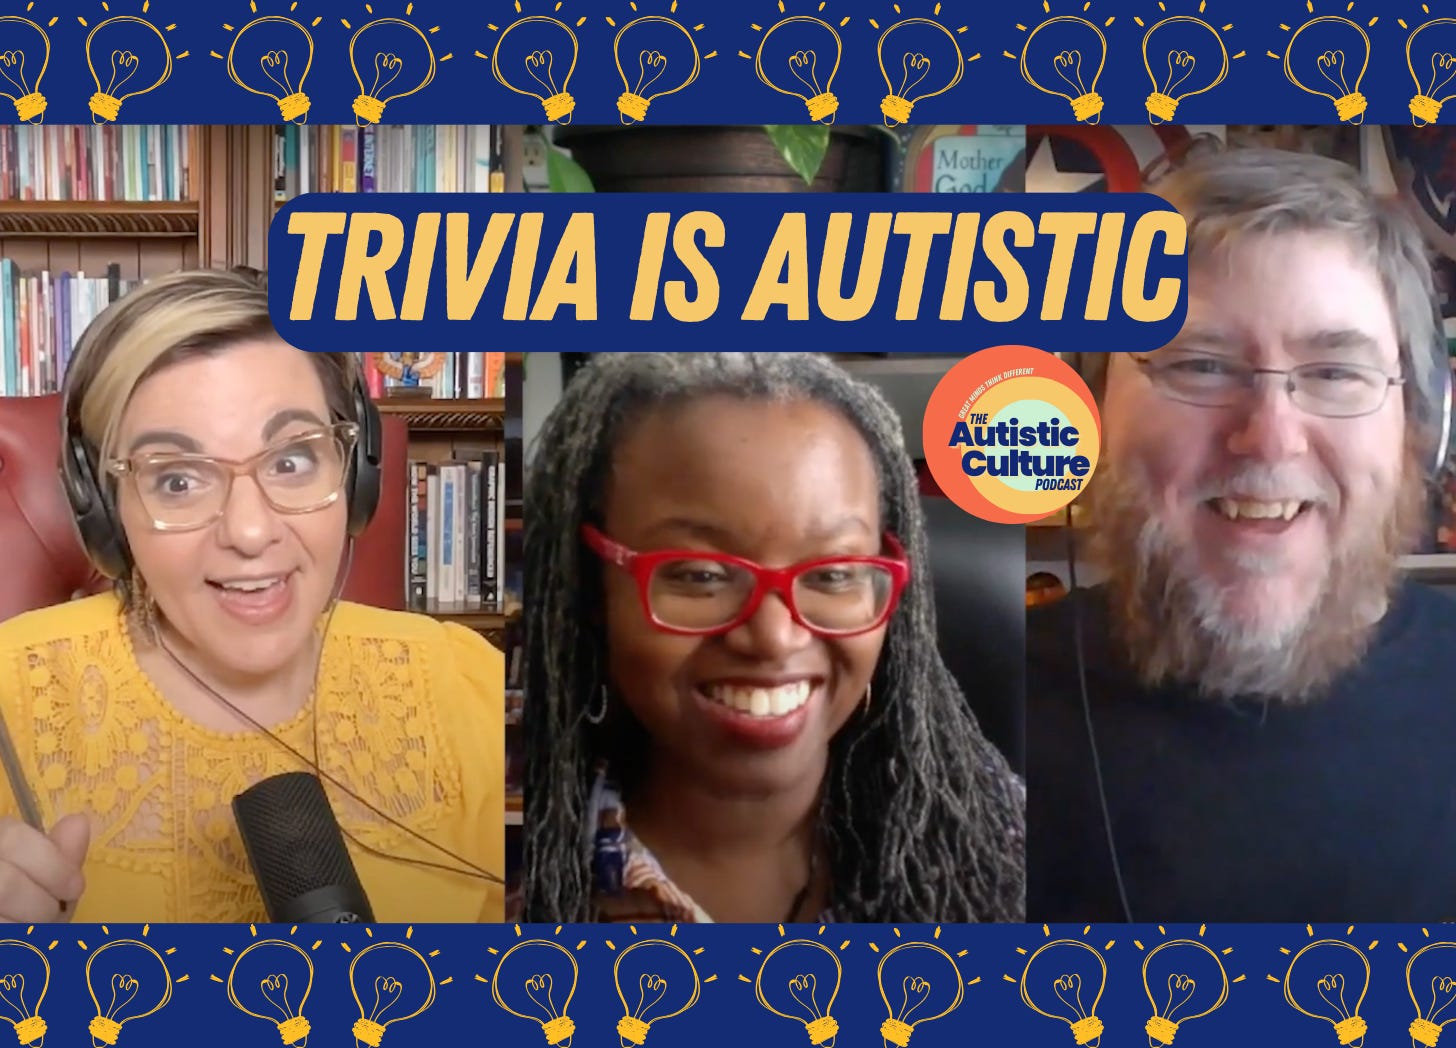 Listen to Autistic podcast hosts discuss: Trivia is Autistic. Autism Podcast | Celebrate Autistic Acceptance Month with us and test your Autistic Culture Knowledge. "A: Makes up 20% of Jeopardy viewers Q: Who are Autistics?"